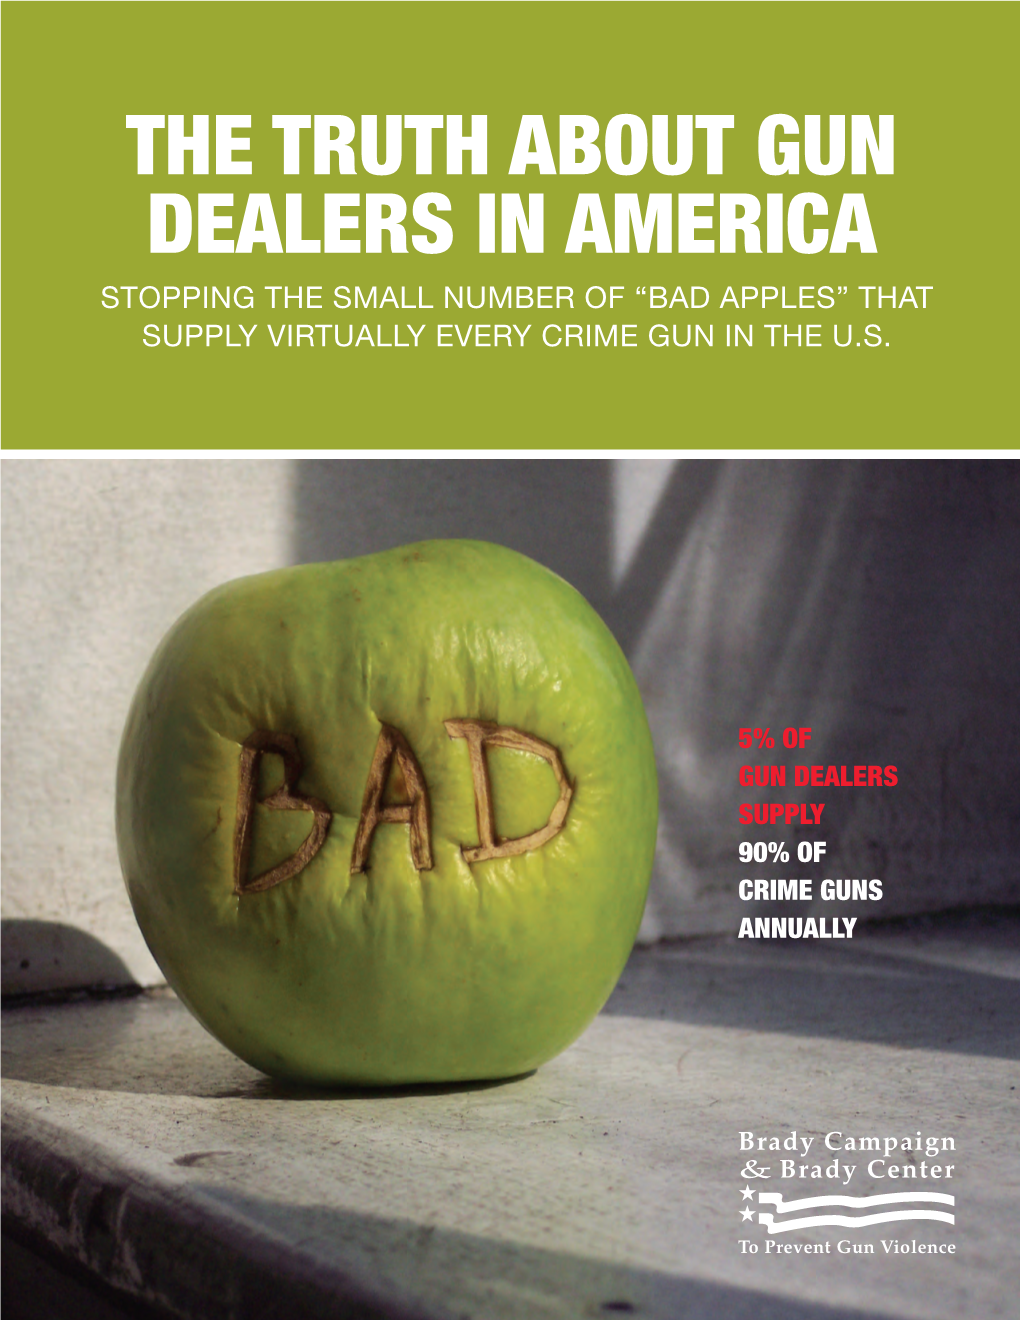 The Truth About Gun Dealers in America Stopping the Small Number of “Bad Apples” That Supply Virtually Every Crime Gun in the U.S